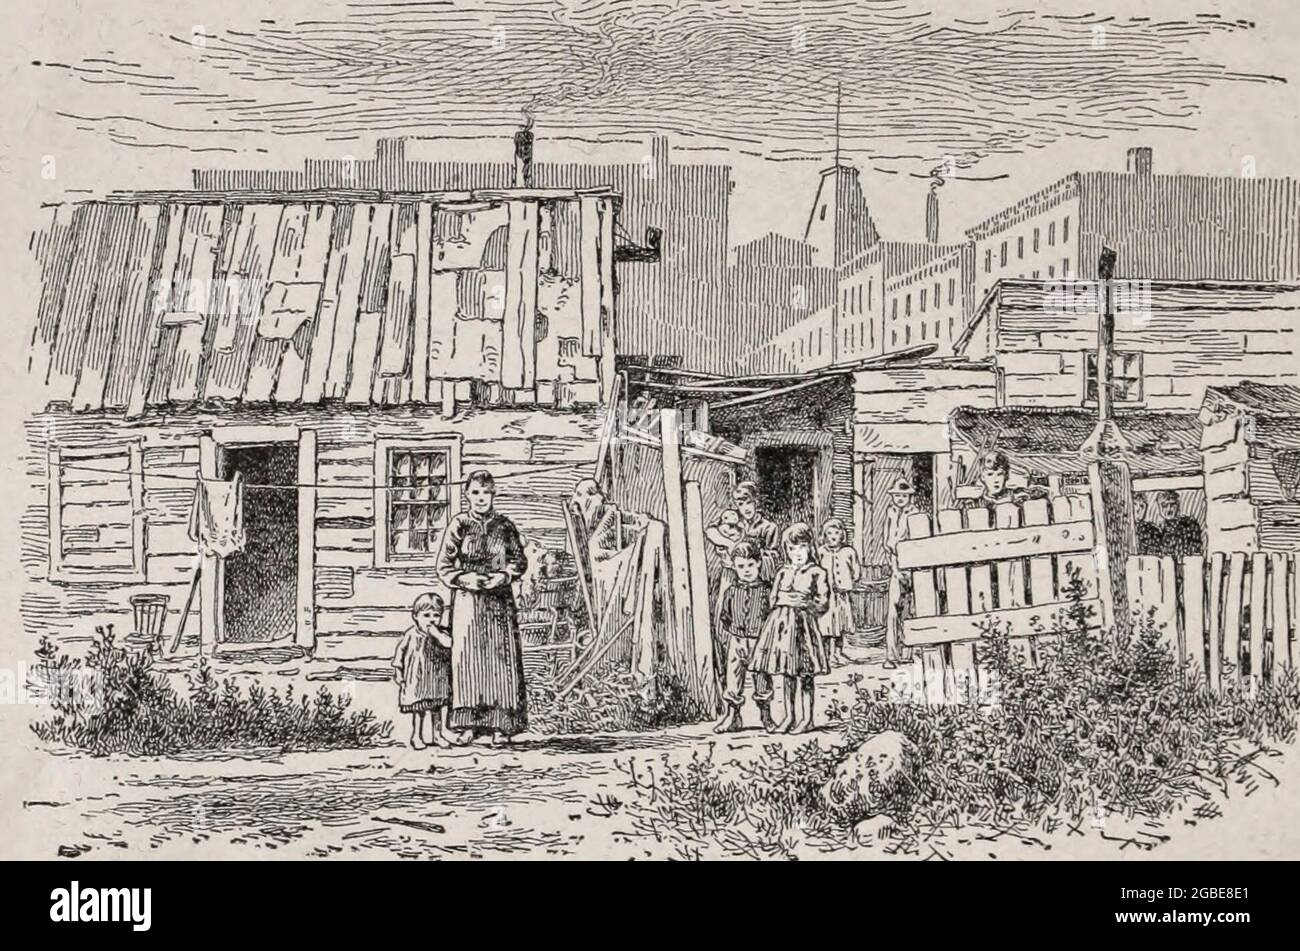 A cluster of shanties in Shantytown, New York City, circa 1890 Stock Photo